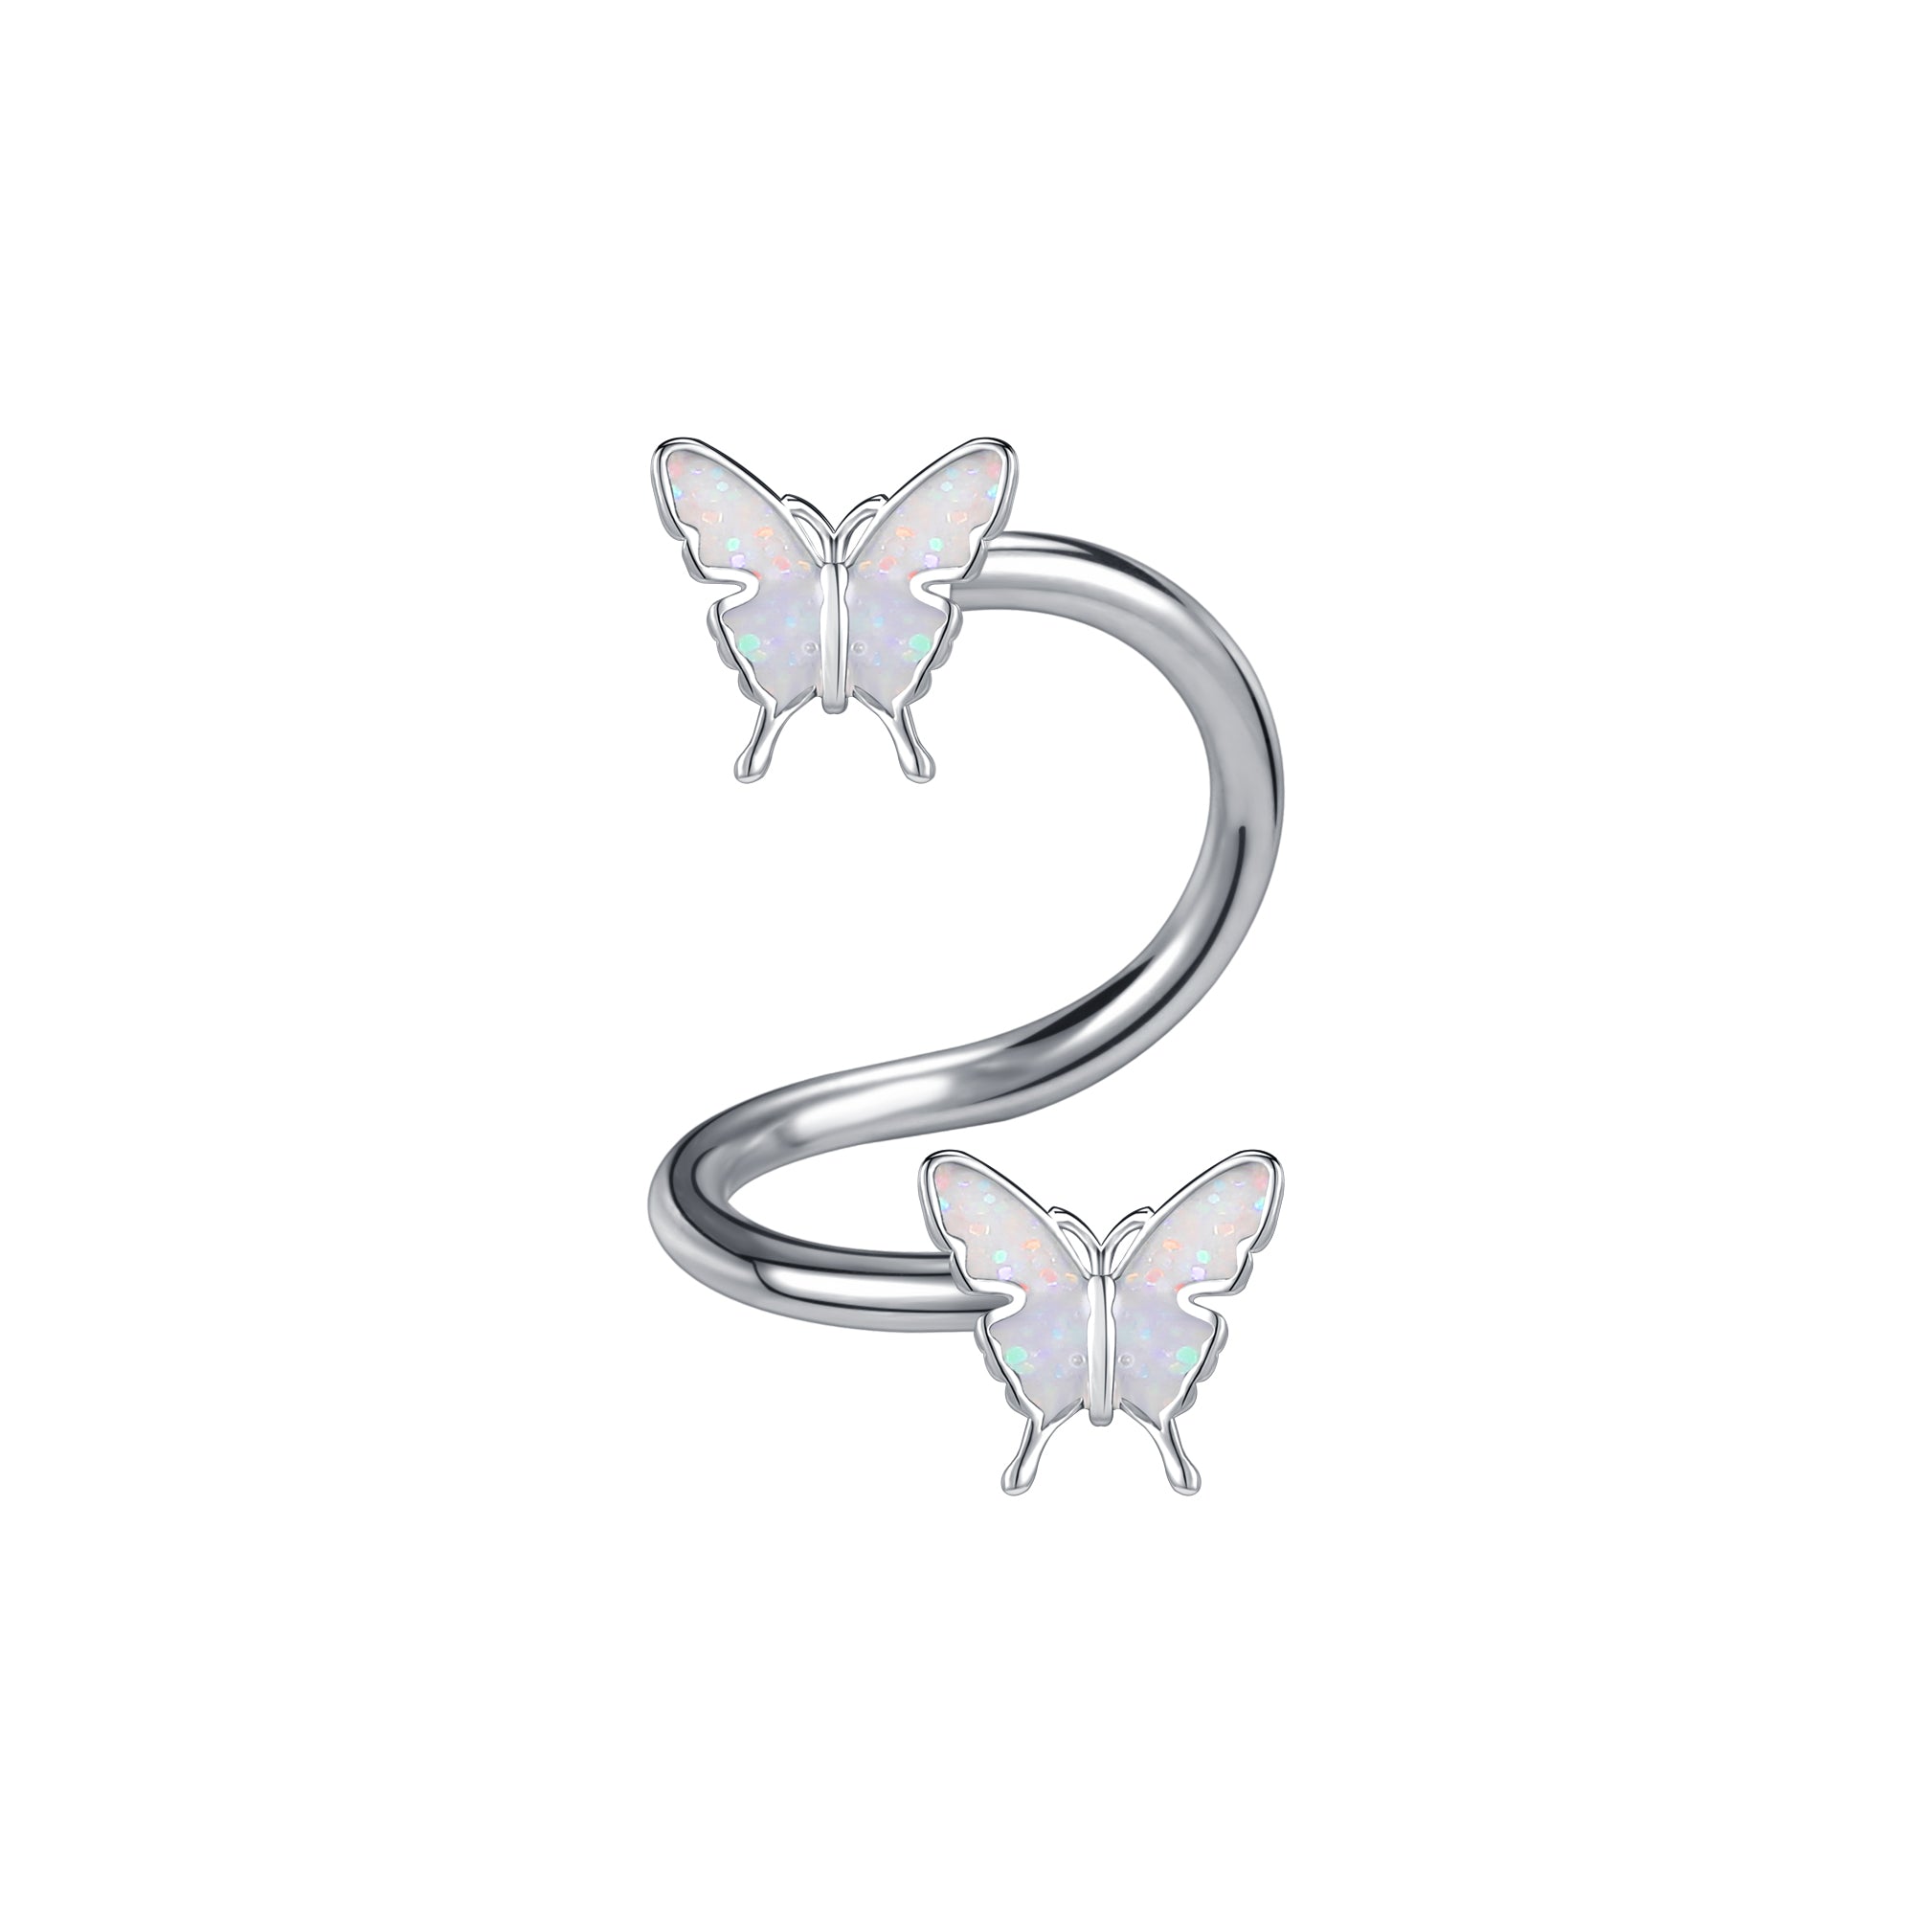 16g-butterfly-lip-piercing-3-colors-helix-conch-cartilage-piercing